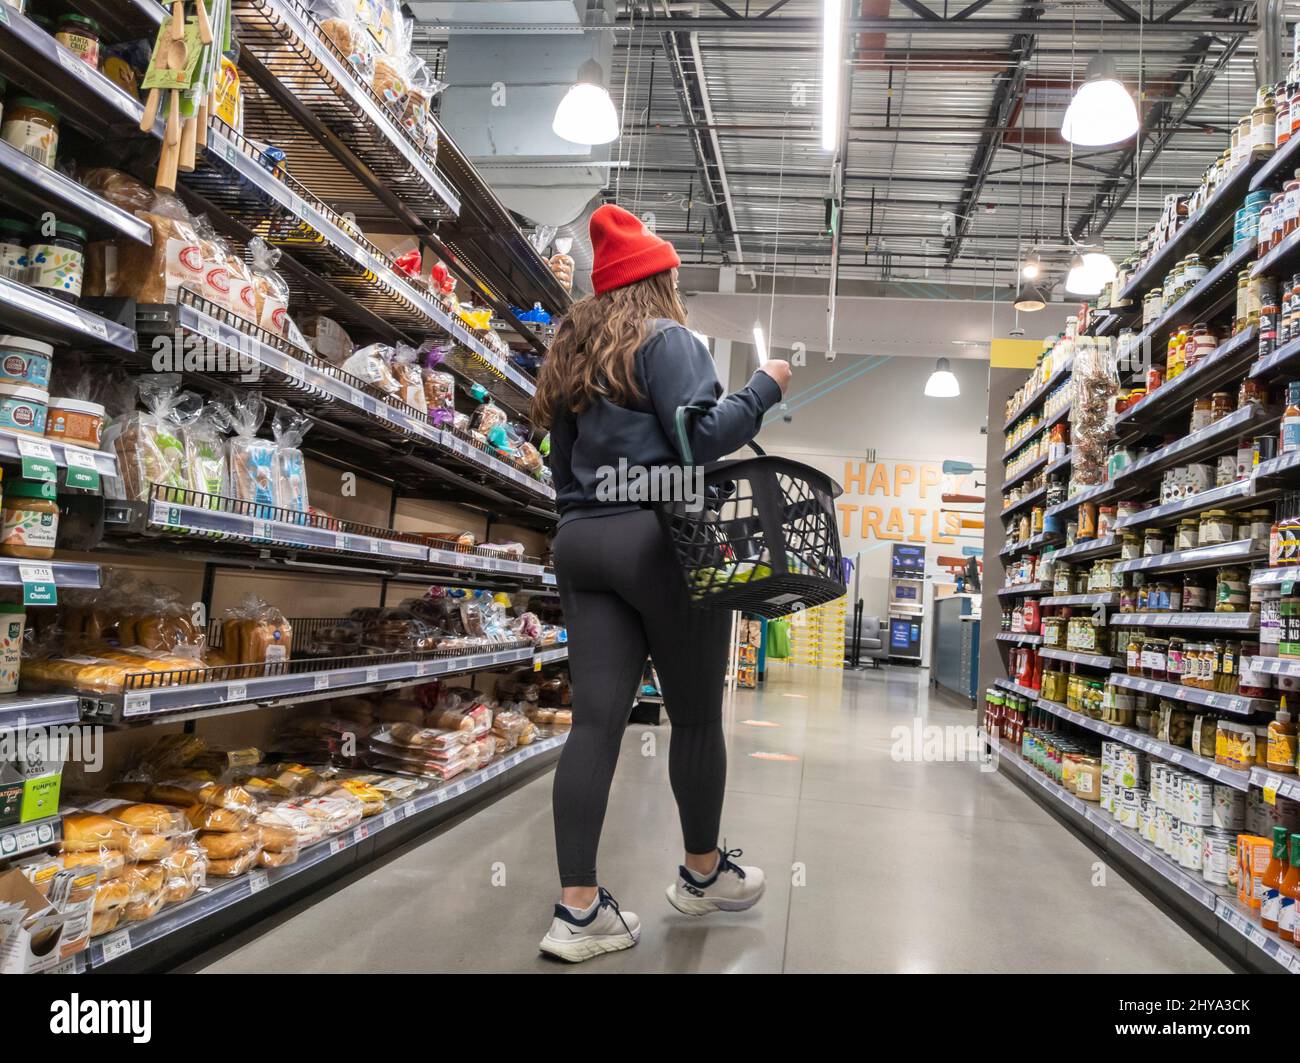 Kirkland, WA USA - circa February 2022: Casucasin woman in a bright red beanie shopping in the bread and jarred spreads aisle inside a Whole Foods Mar Stock Photo